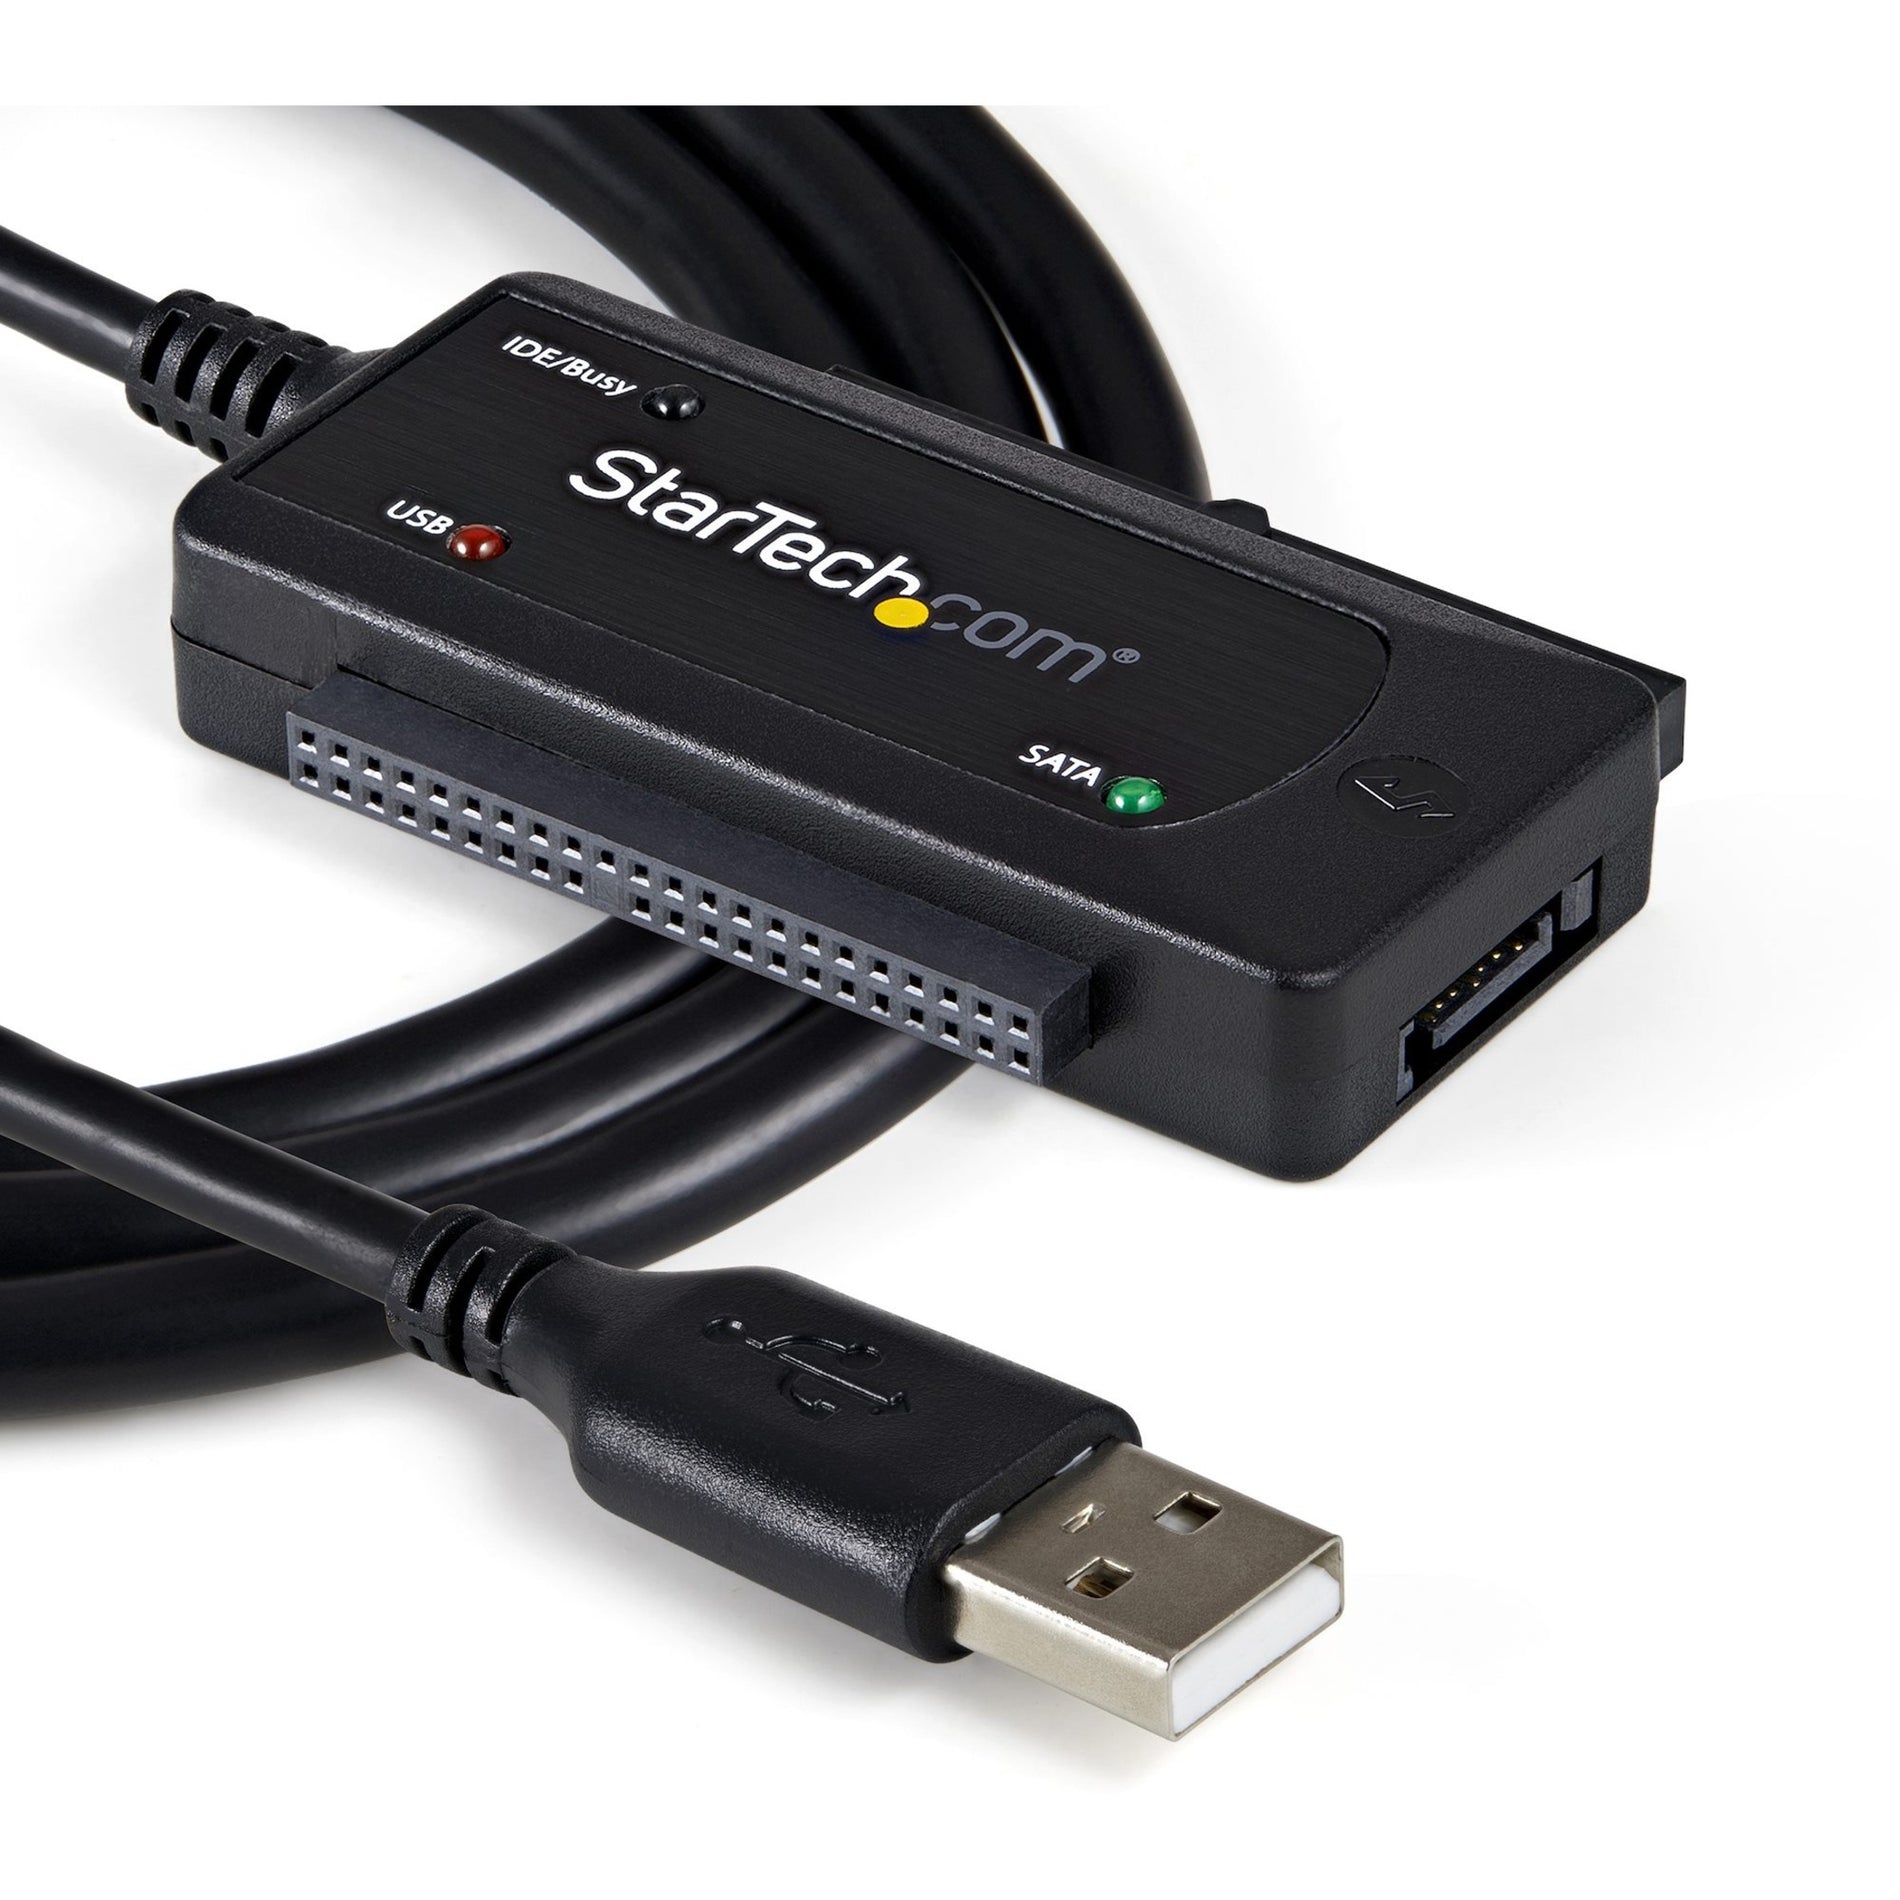 StarTech.com USB2SATAIDE USB 2.0 to SATA/IDE Combo Adapter for 2.5/3.5" SSD/HDD, Copy, Backup, or Transfer Data